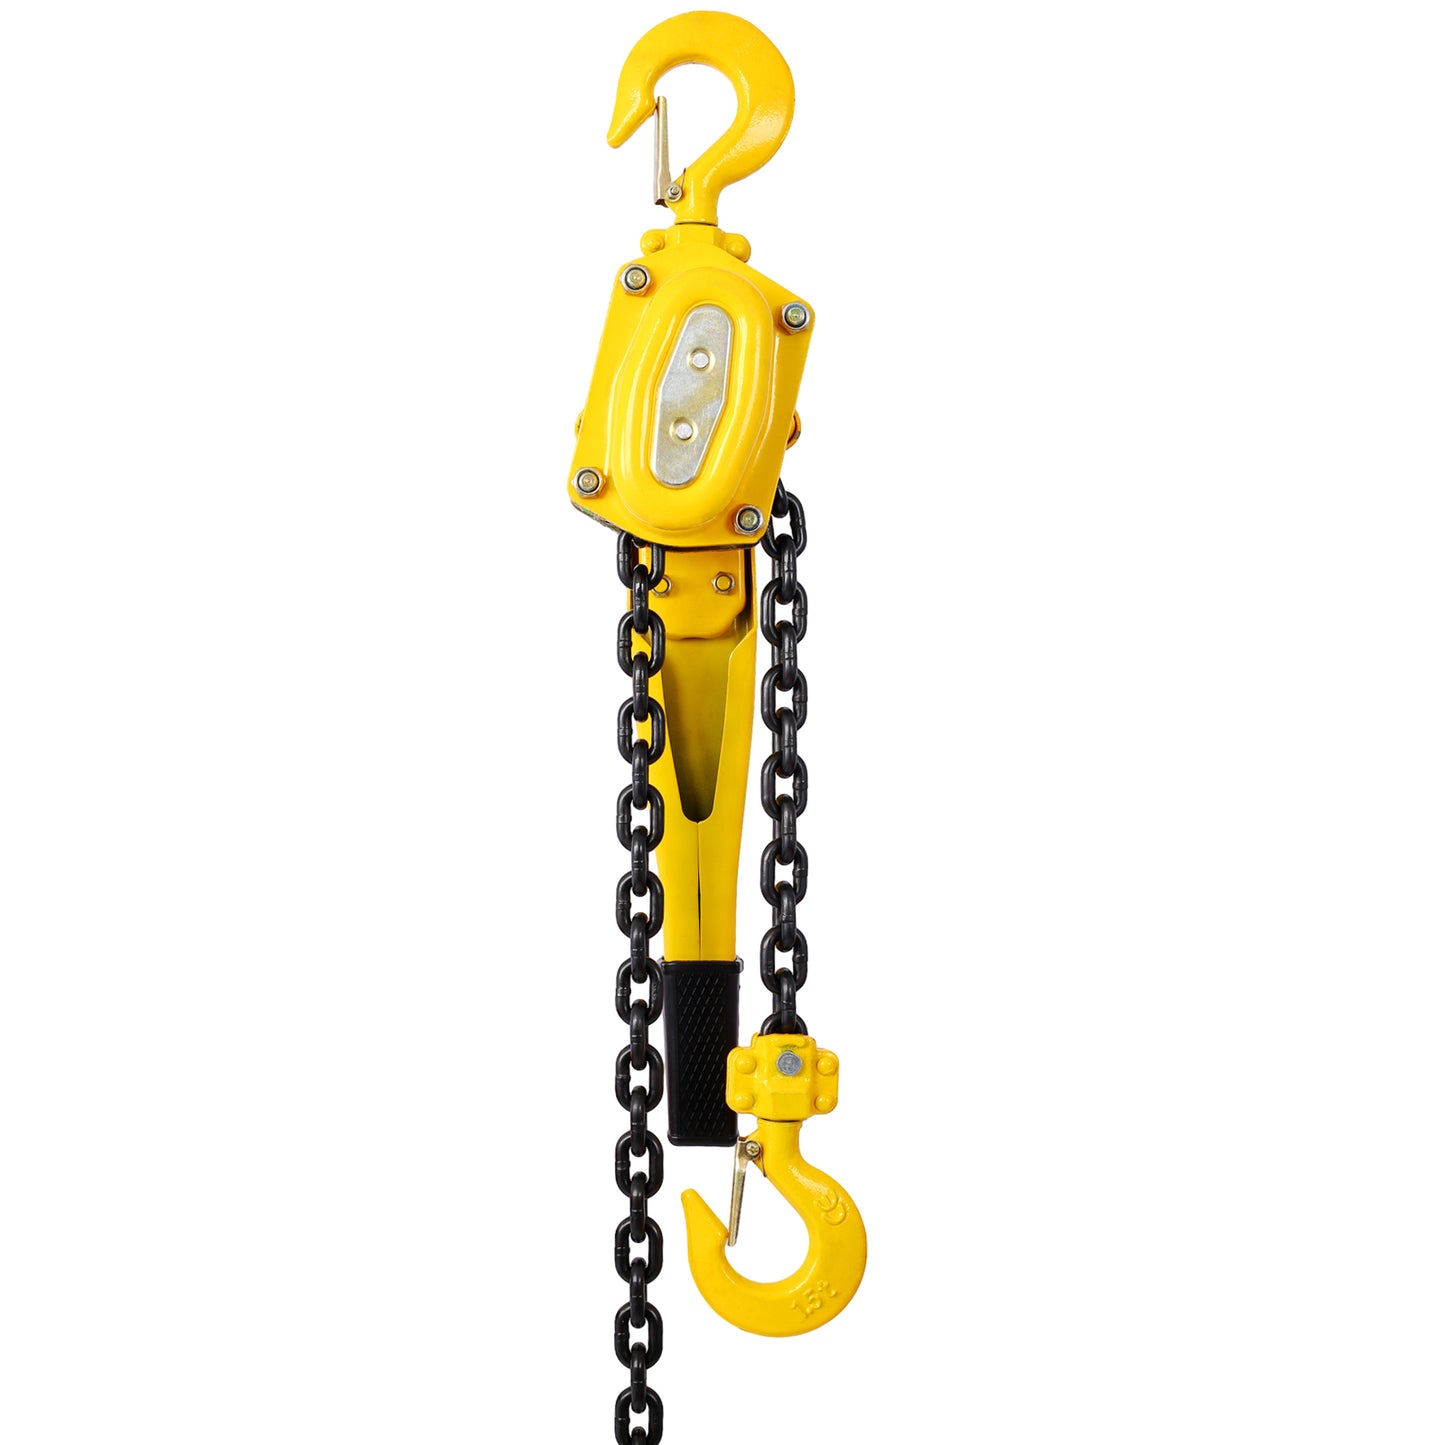 Lever Chain Hoist  1 1/2 Ton 3300LBS Capacity 5 FT Chain Come Along with Heavy Duty Hooks Ratchet Lever Chain Block Hoist Lift Puller